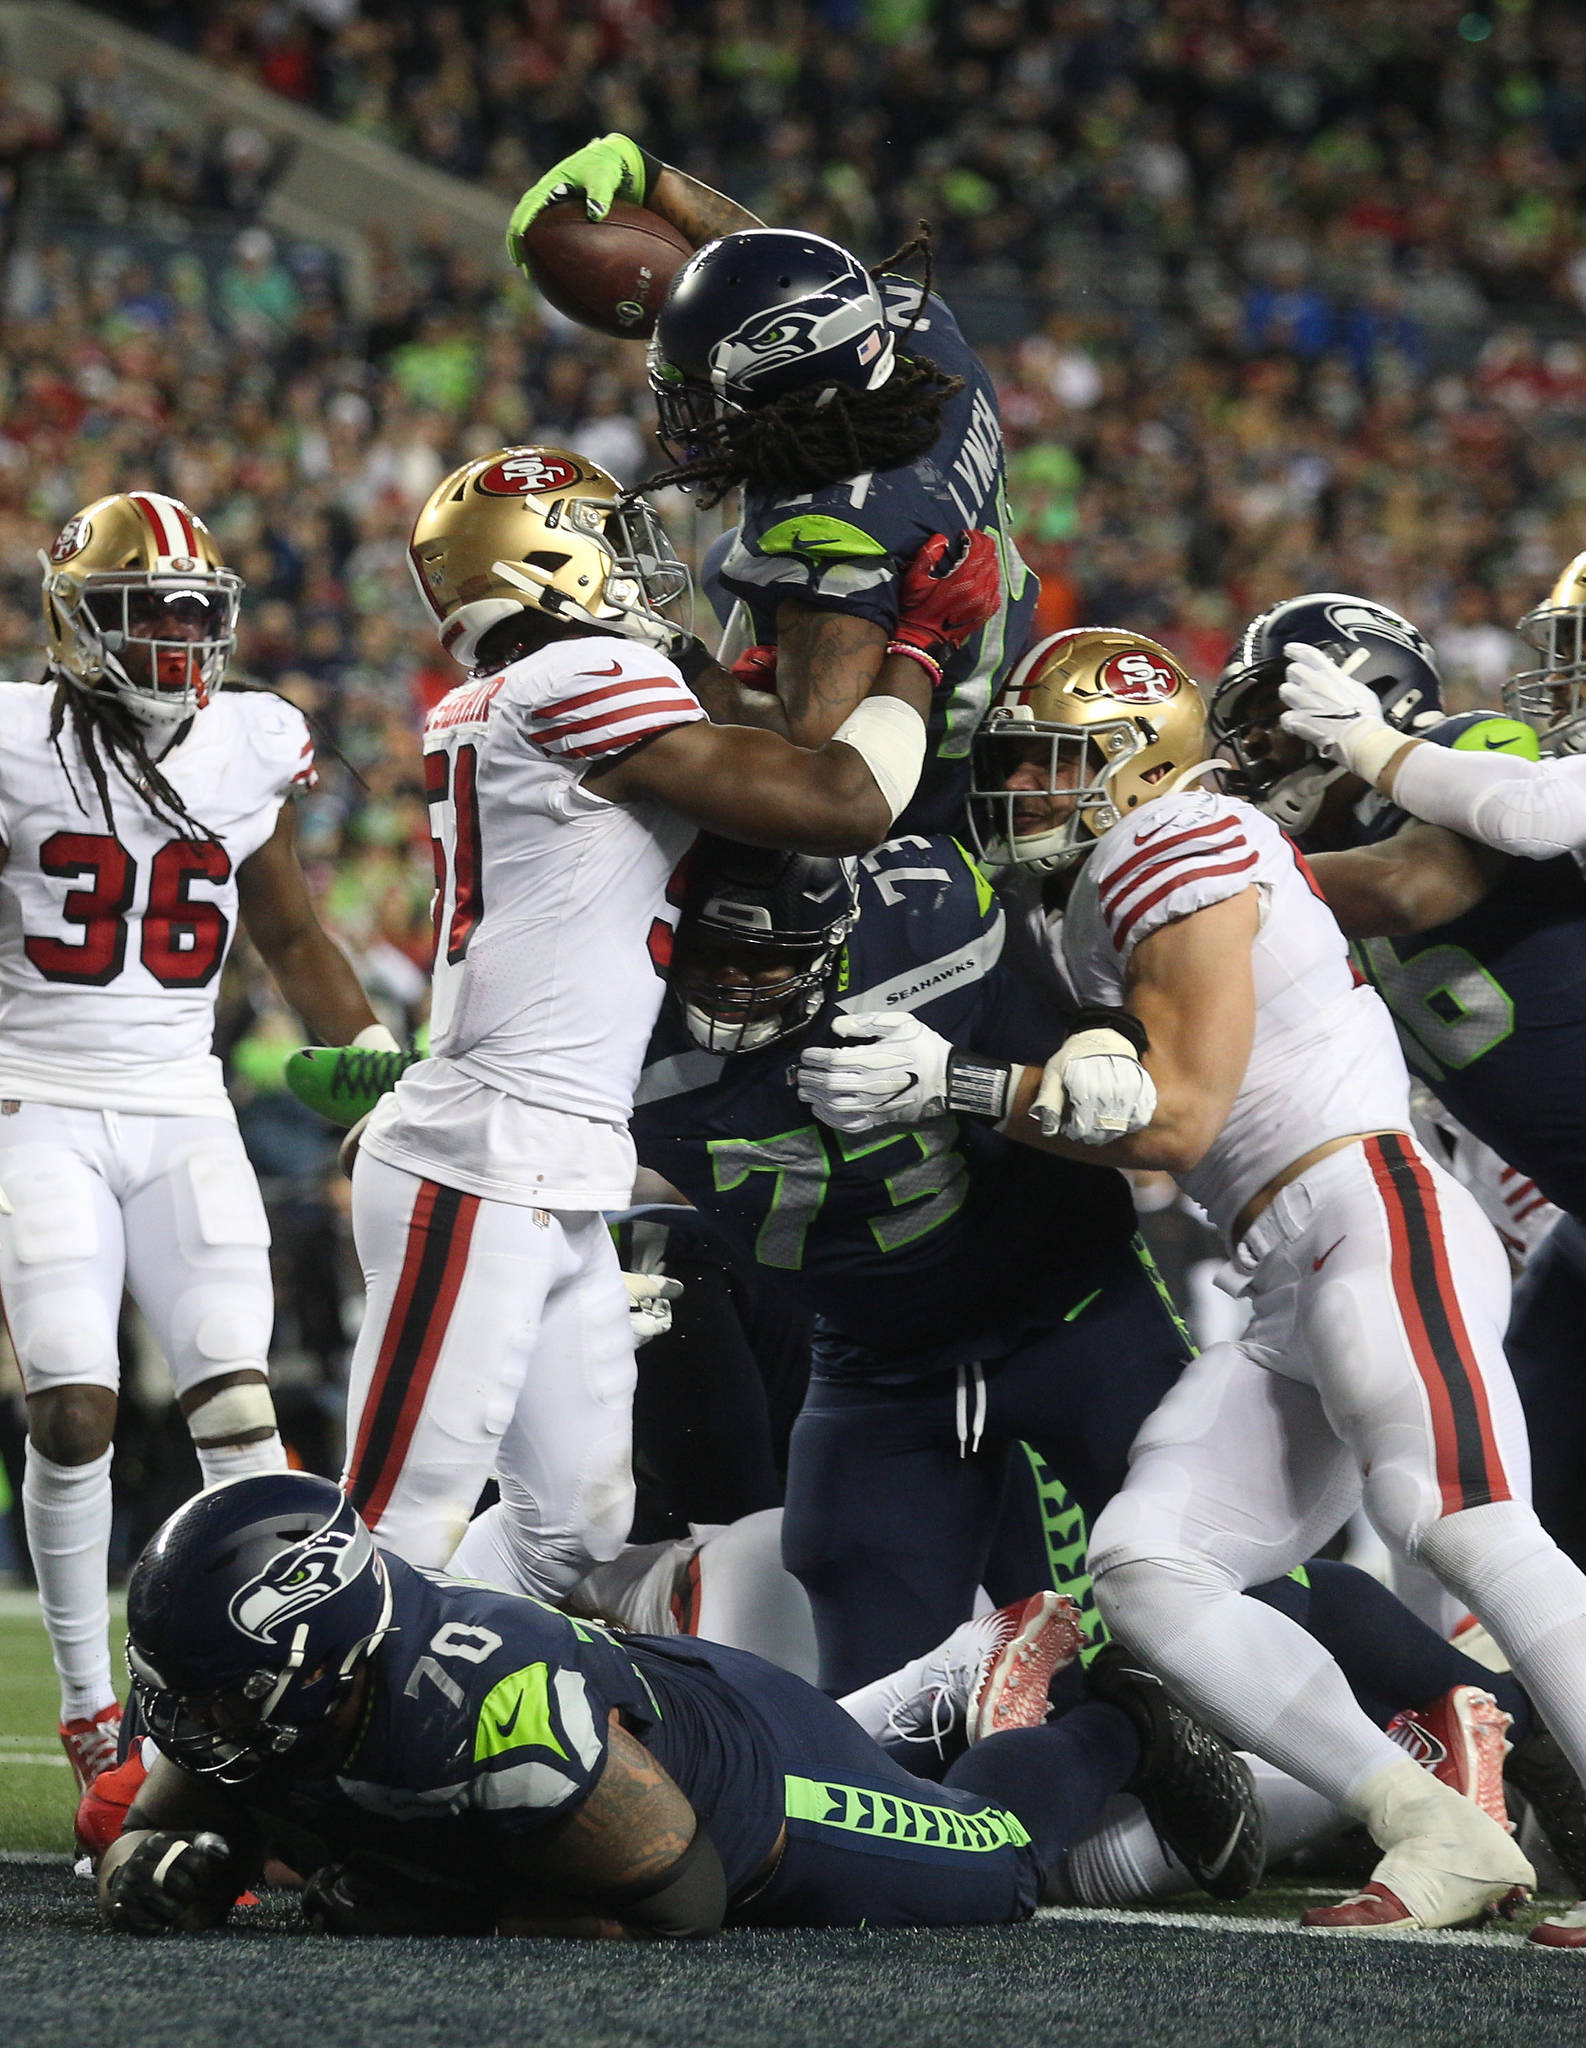 Seattle Seahawks’ Marshawn Lynch reaches up and over for a touchdown as the Seattle Seahawks lost to the San Francisco 49ers 26-21 at CenturyLink Field on Sunday, Dec. 29, 2019 in Seattle, Wash. (Andy Bronson / The Herald)